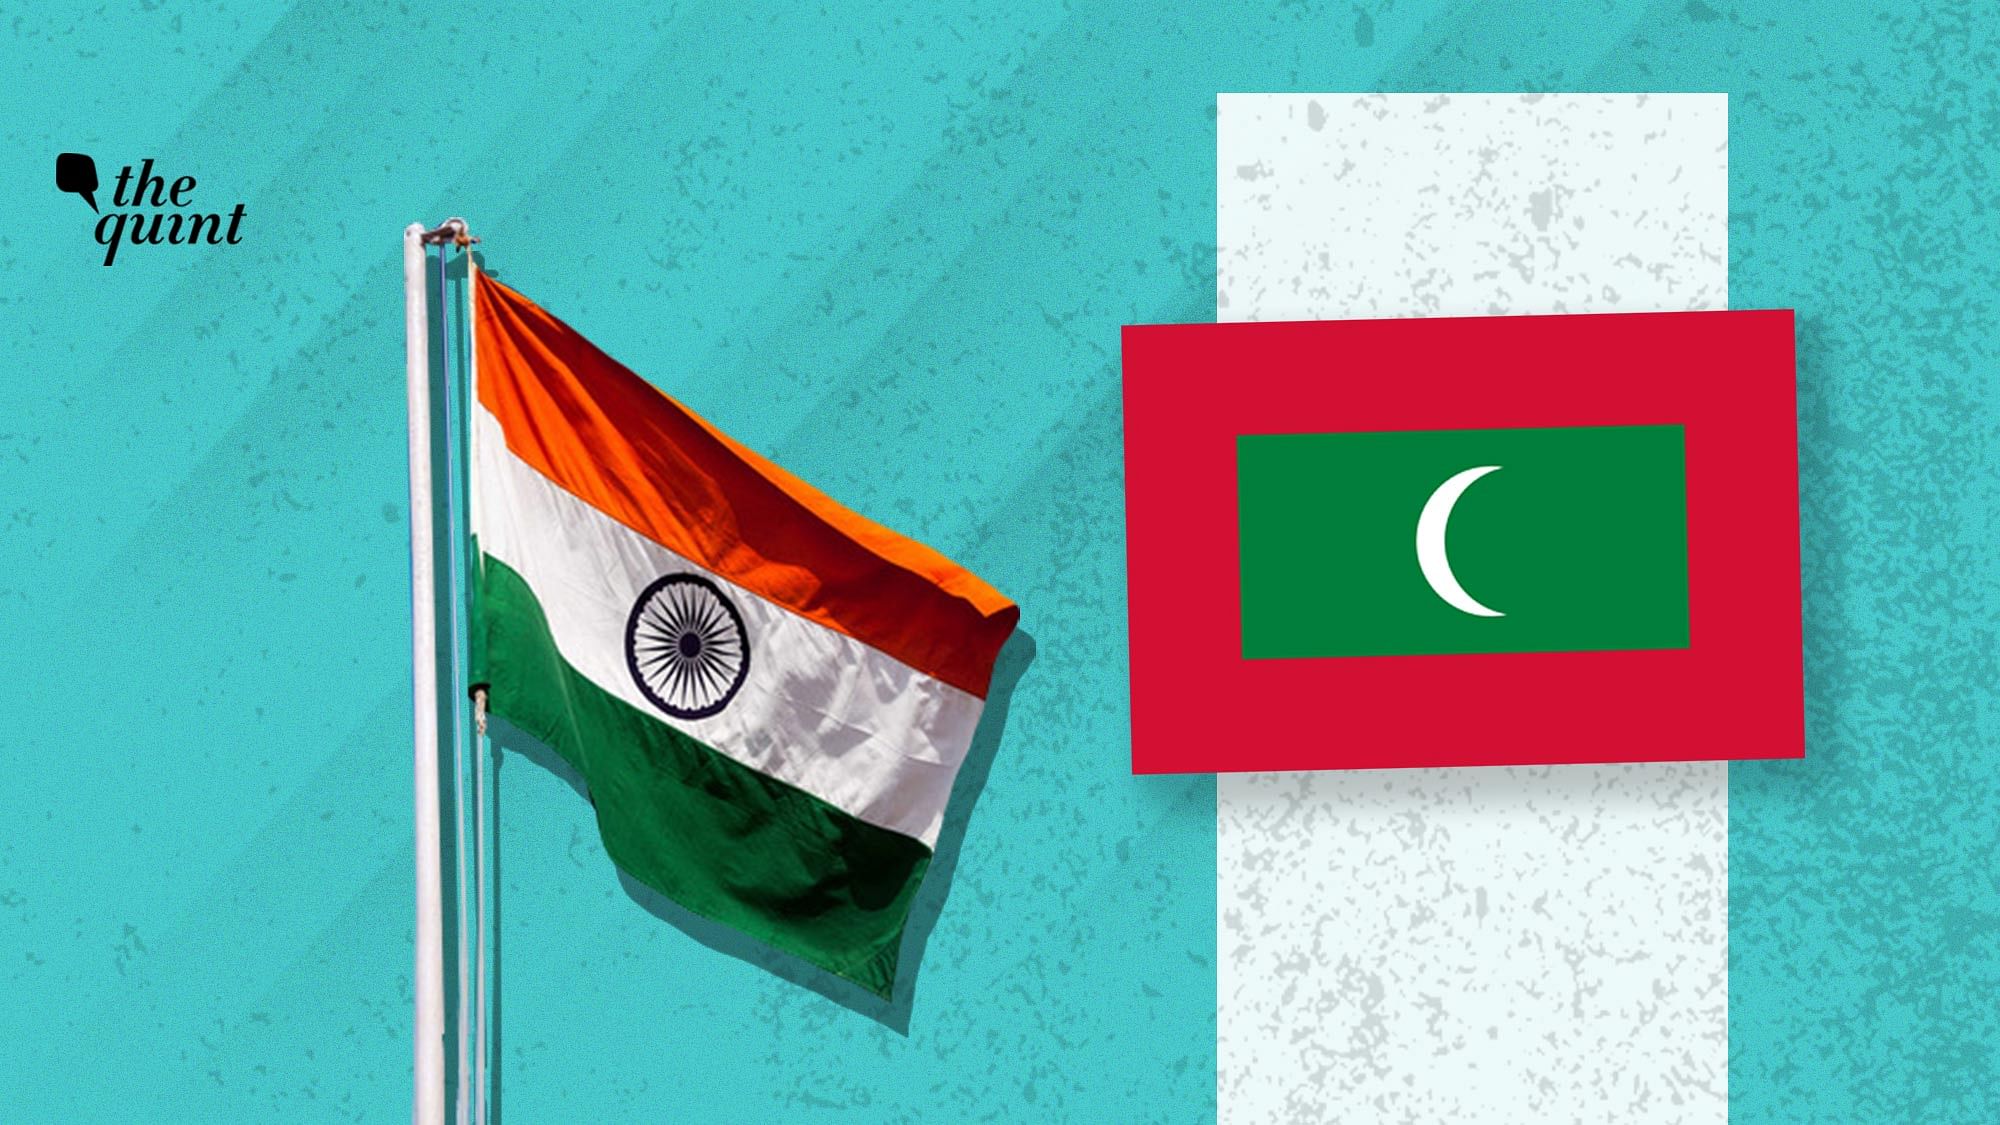 Image of Indian flag (L) and Maldives flag (R) used for representational purposes.